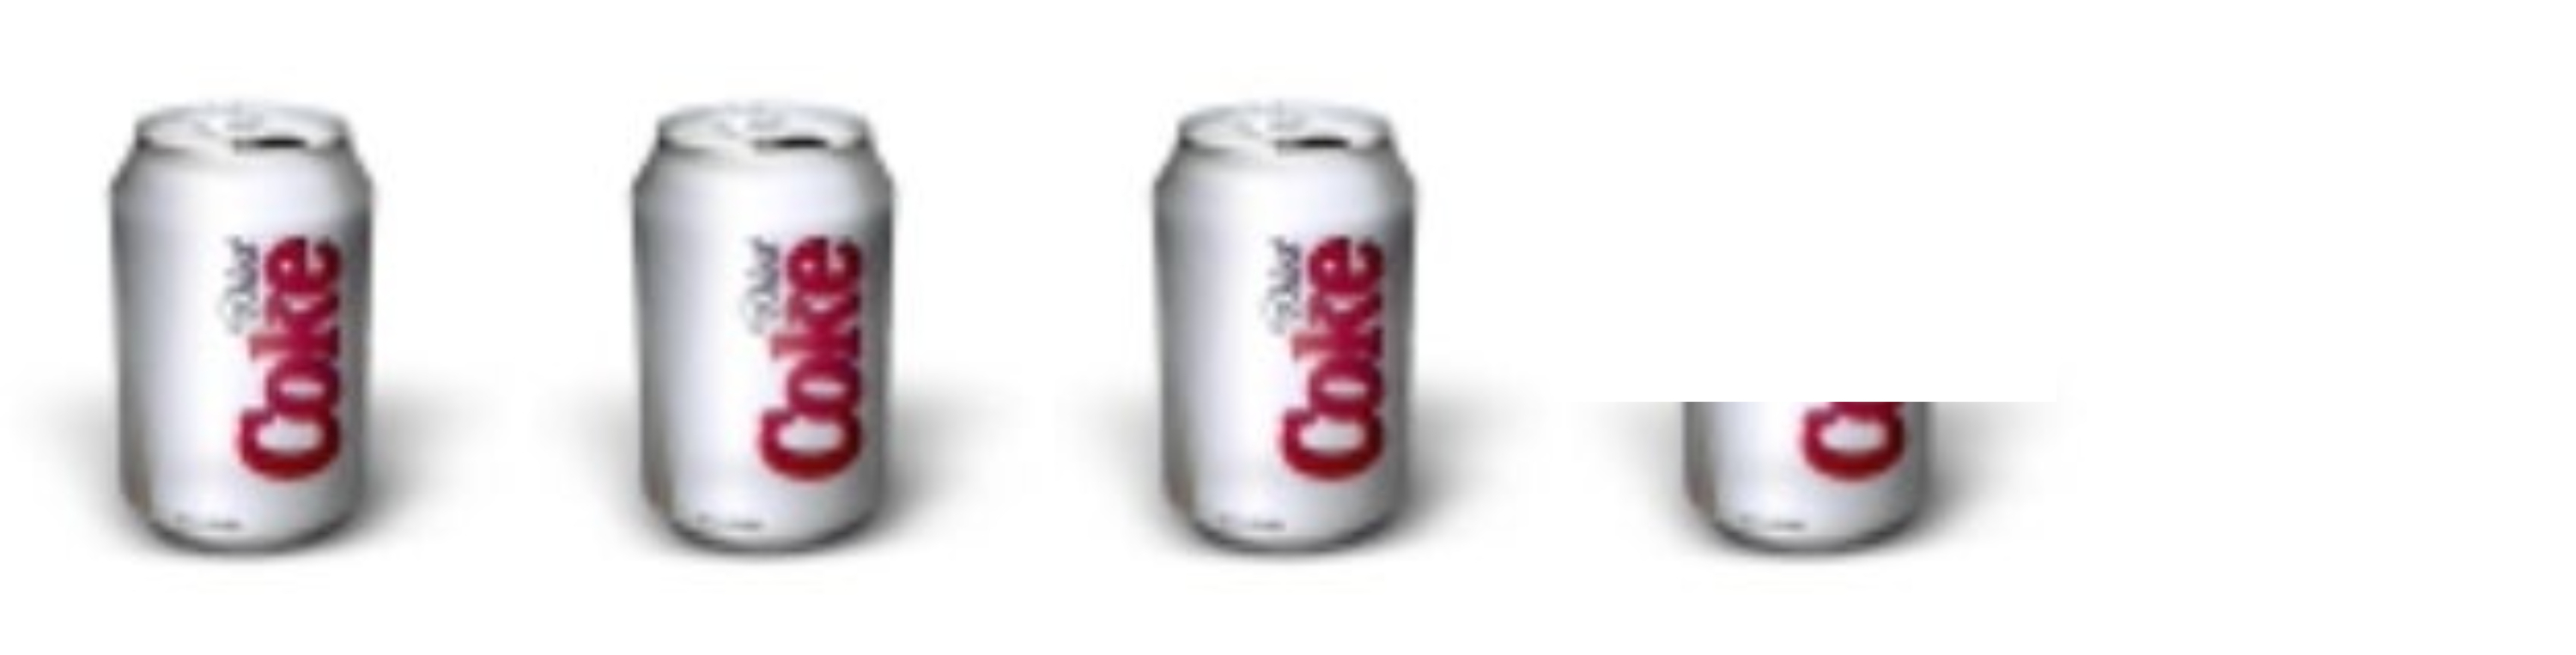 Three and a fifth Diet Coke emojis representing rating stars